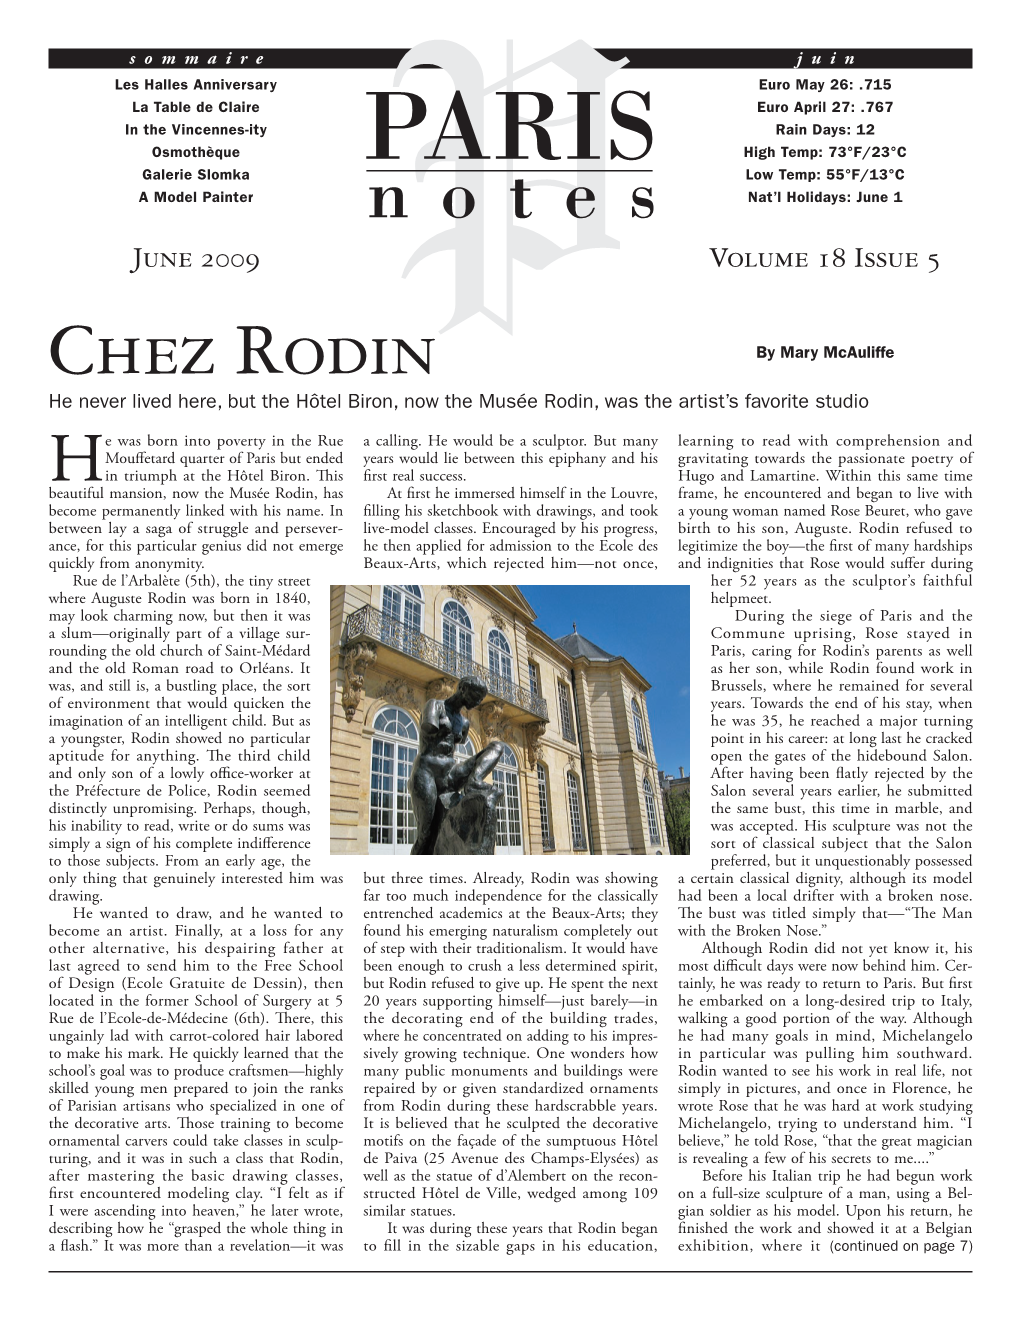 The Rodin Museum